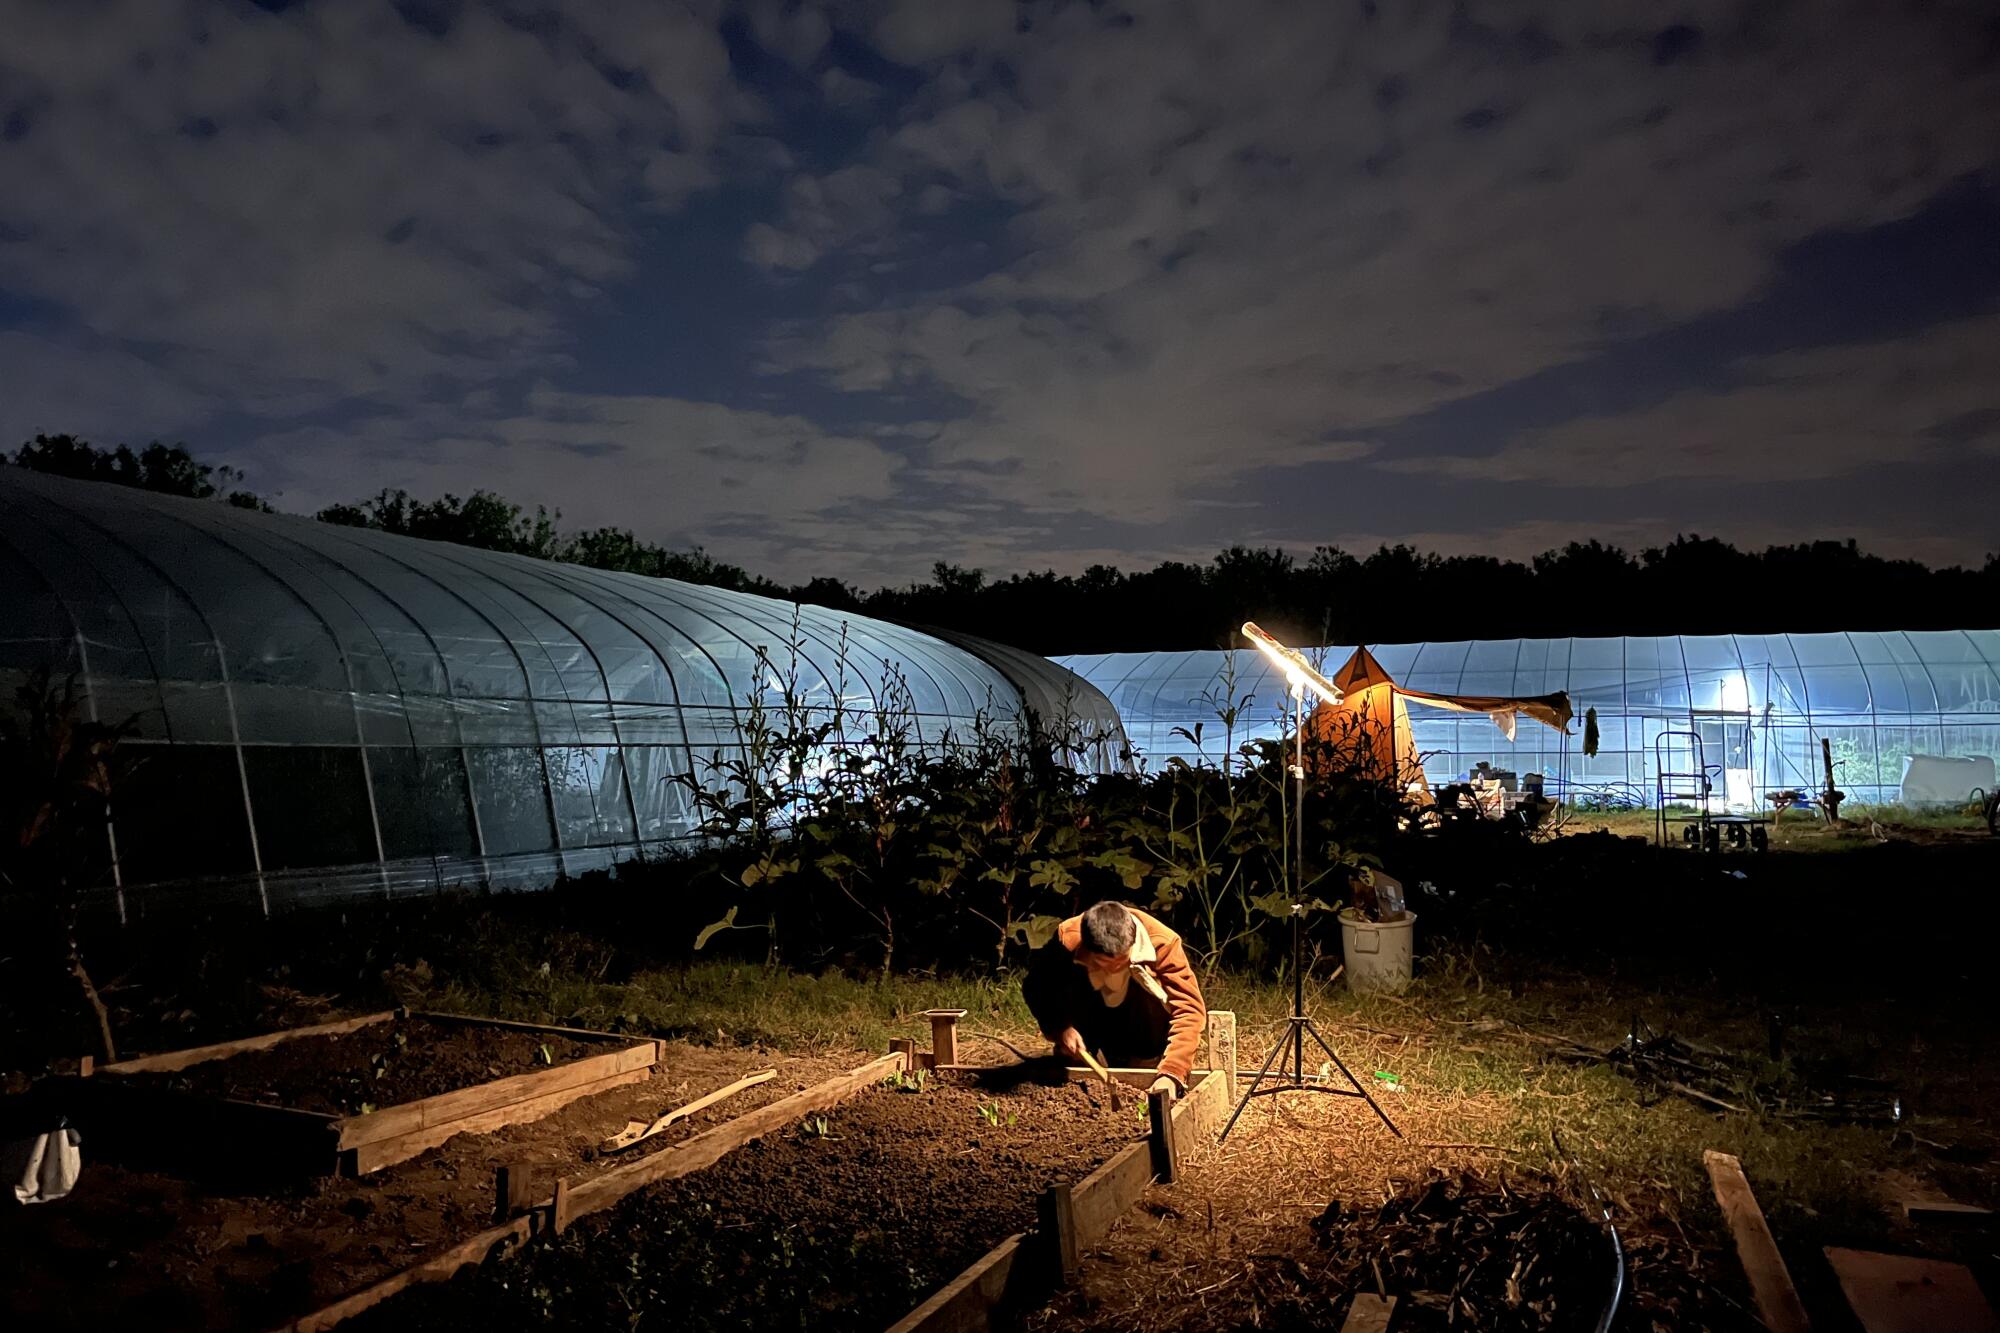 Two people working near greenhouses, illuminated in the dark